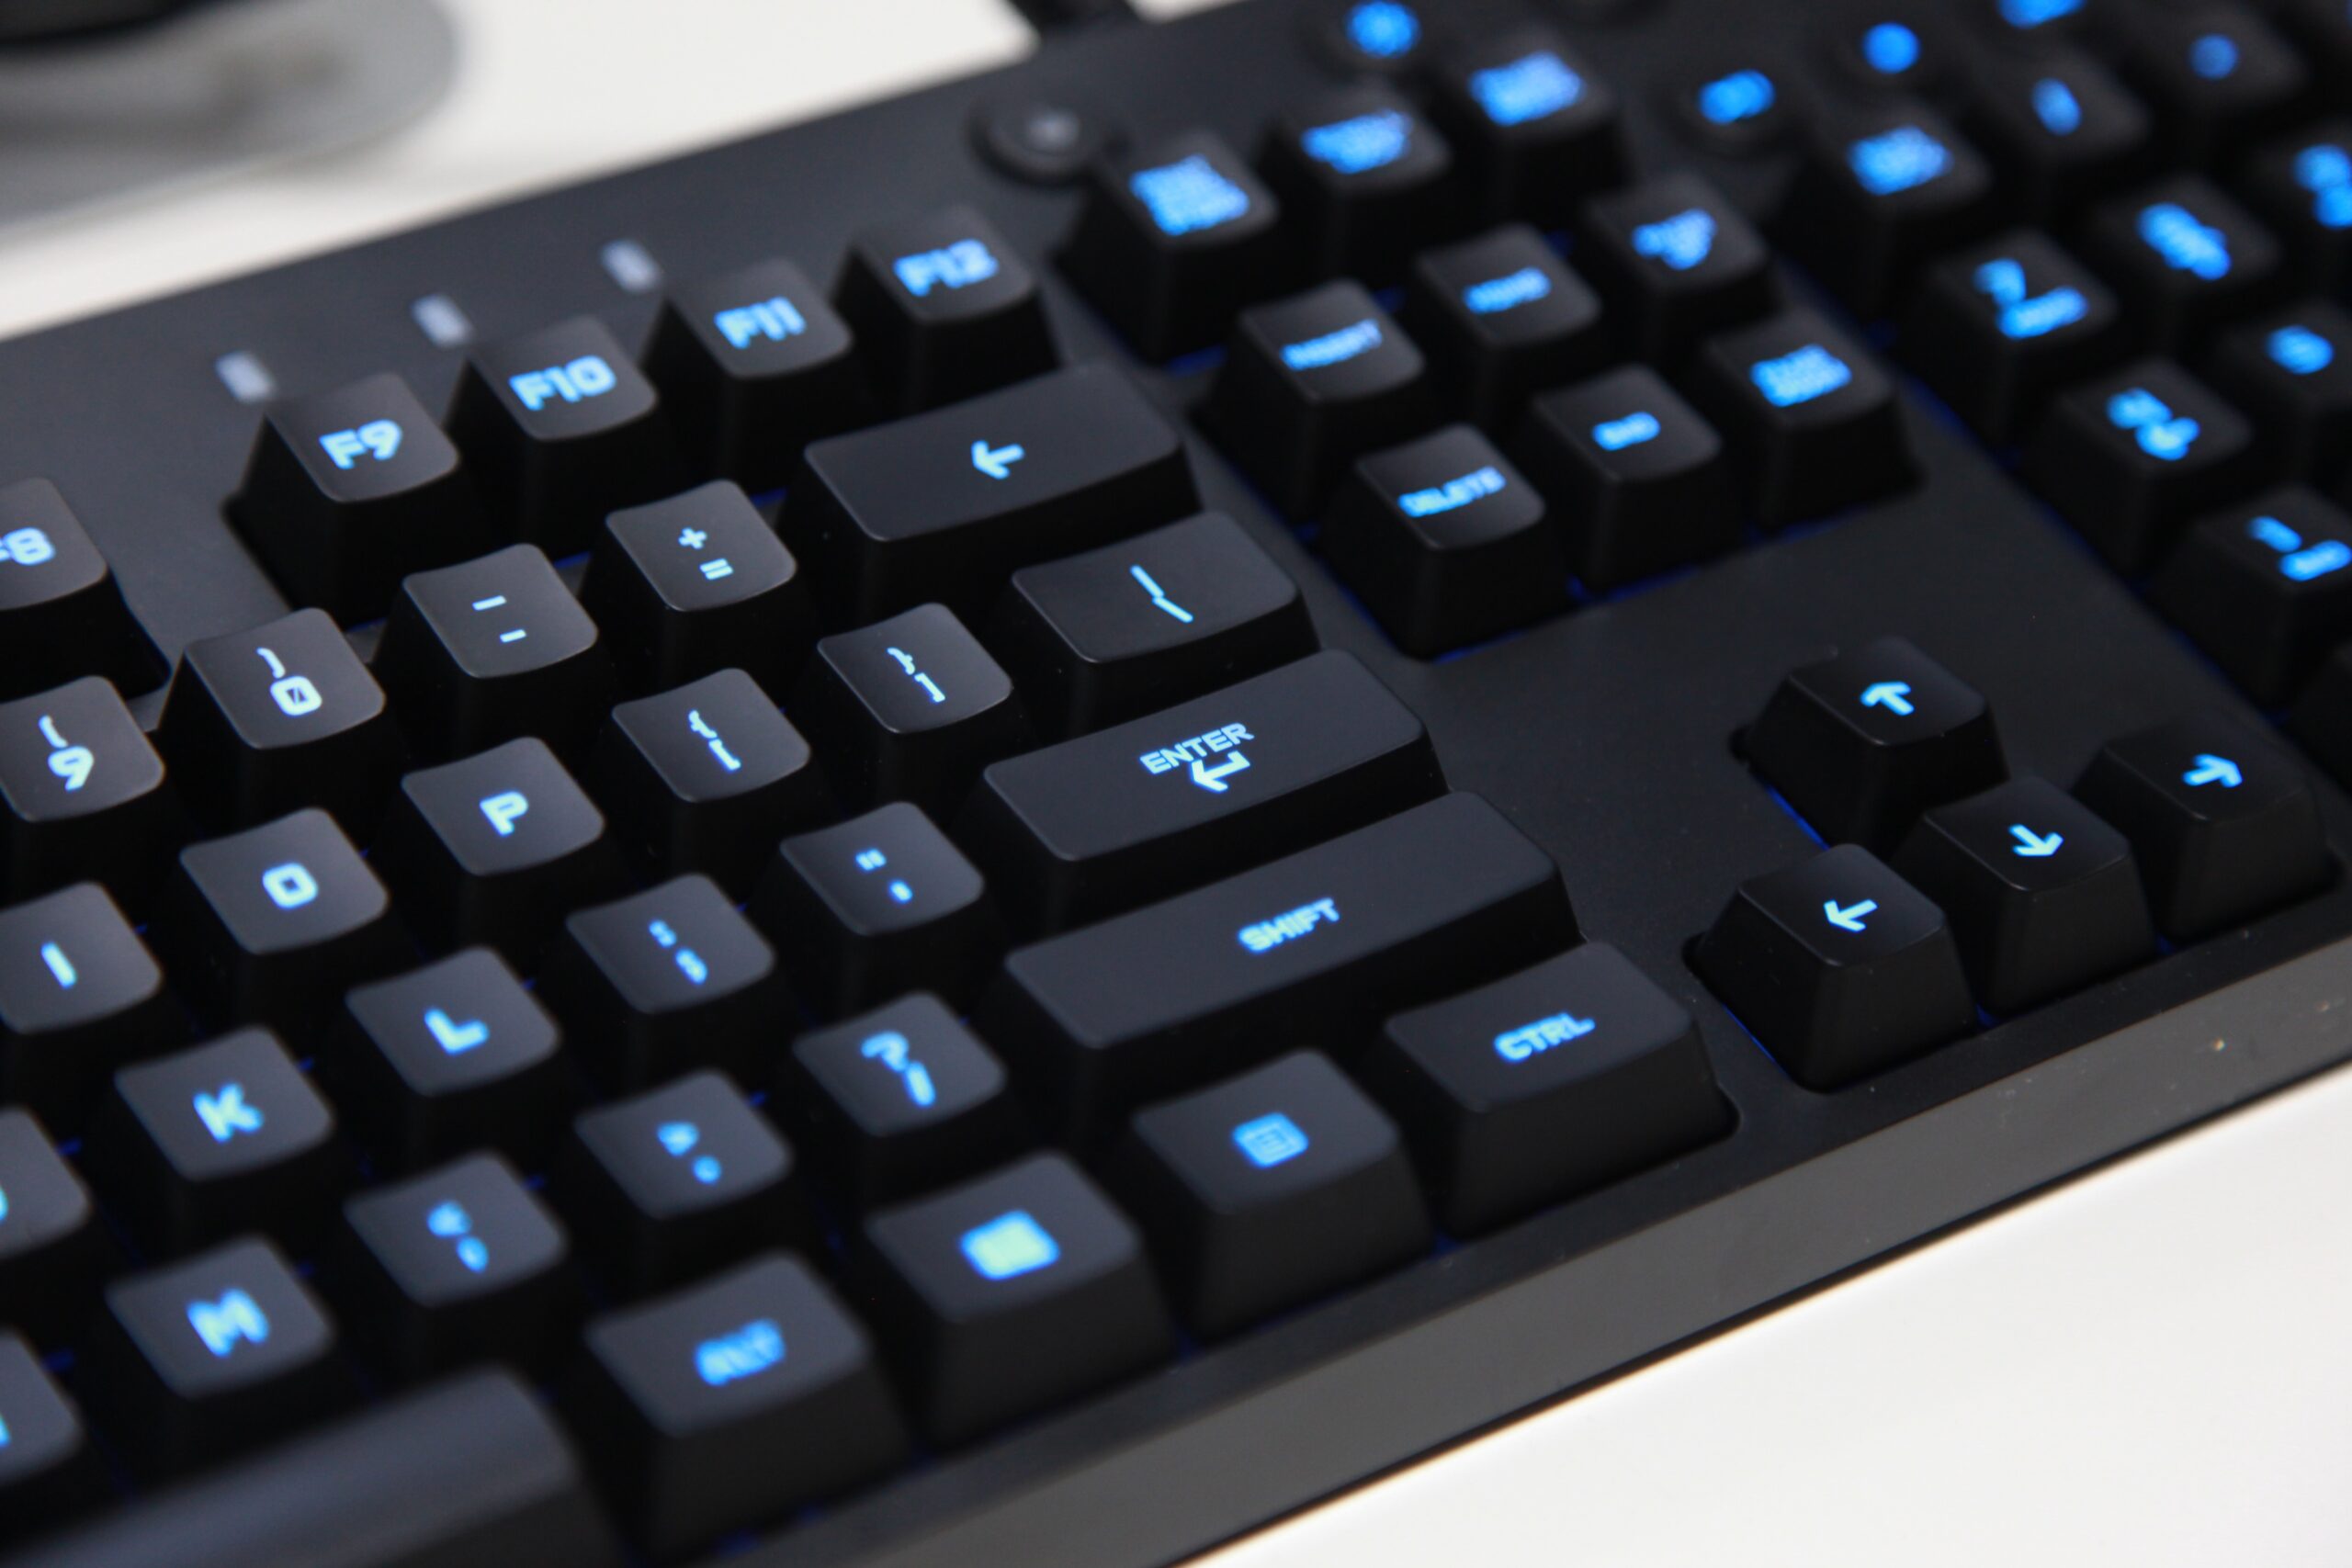 Logitech's G810 Keyboard The Gaming Keyboard You'll To To Work